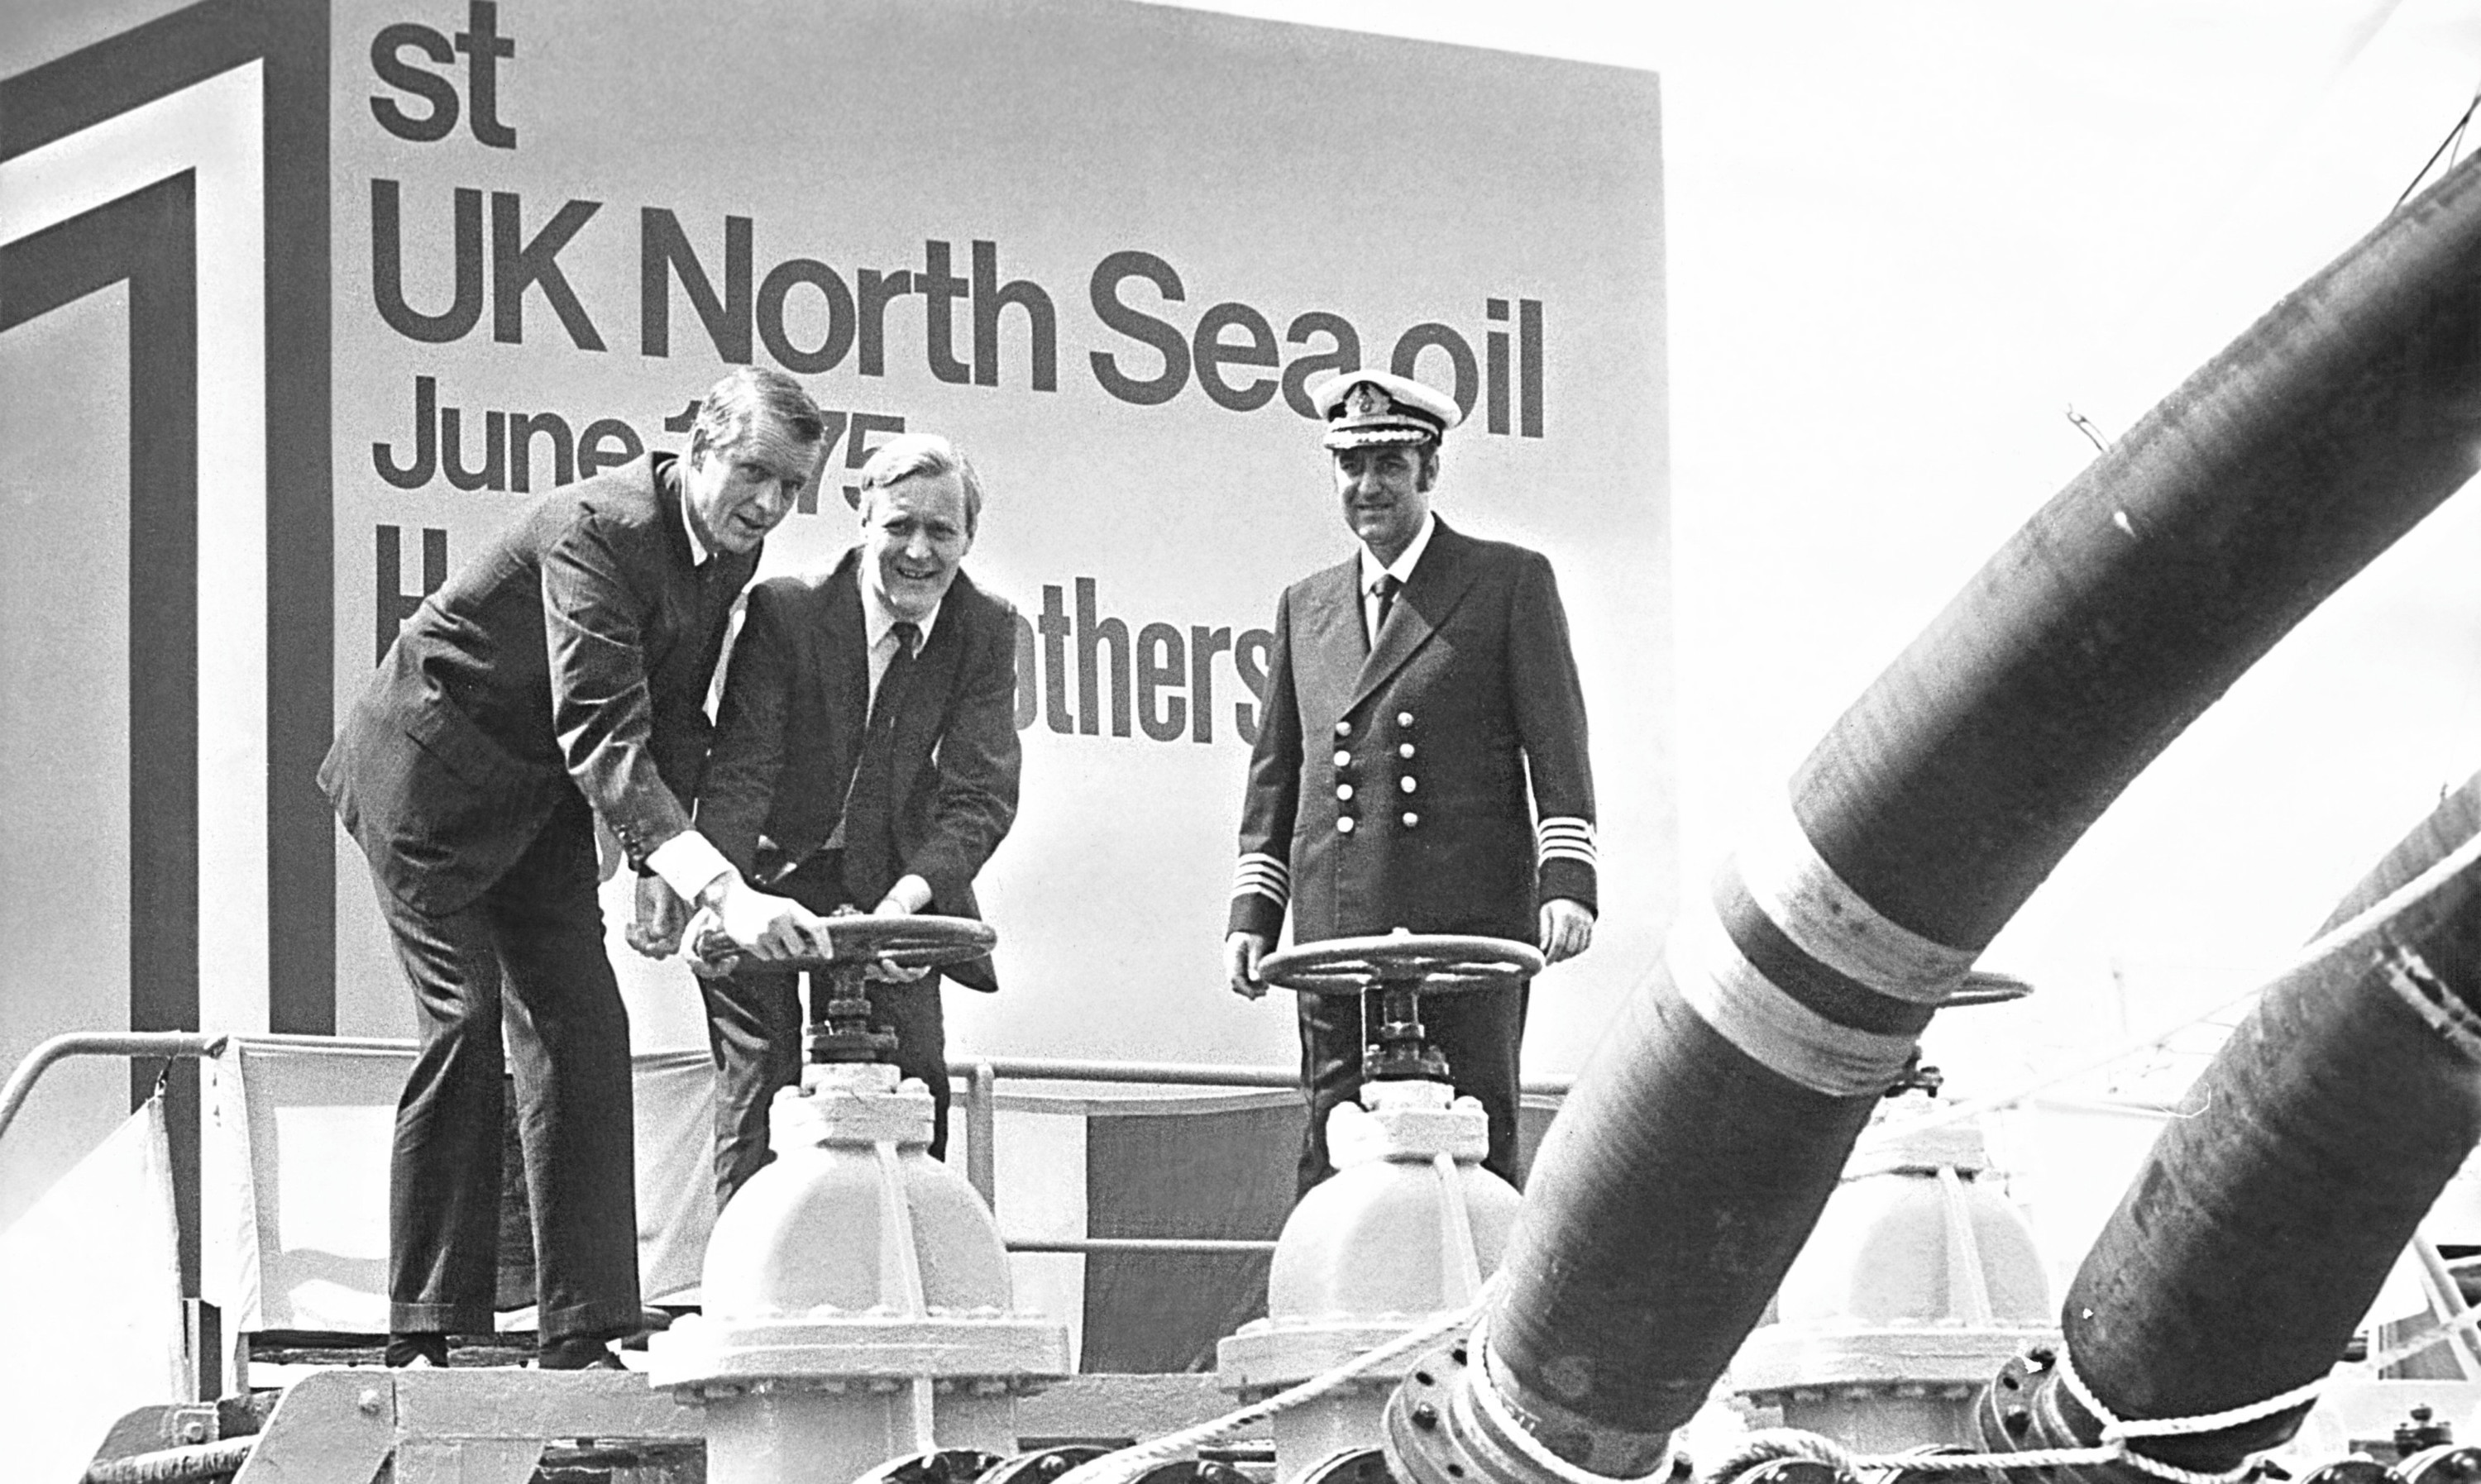 Former Energy Secretary Tony Benn opens a valve to release the firstoil from the Argyll field in the North Sea.